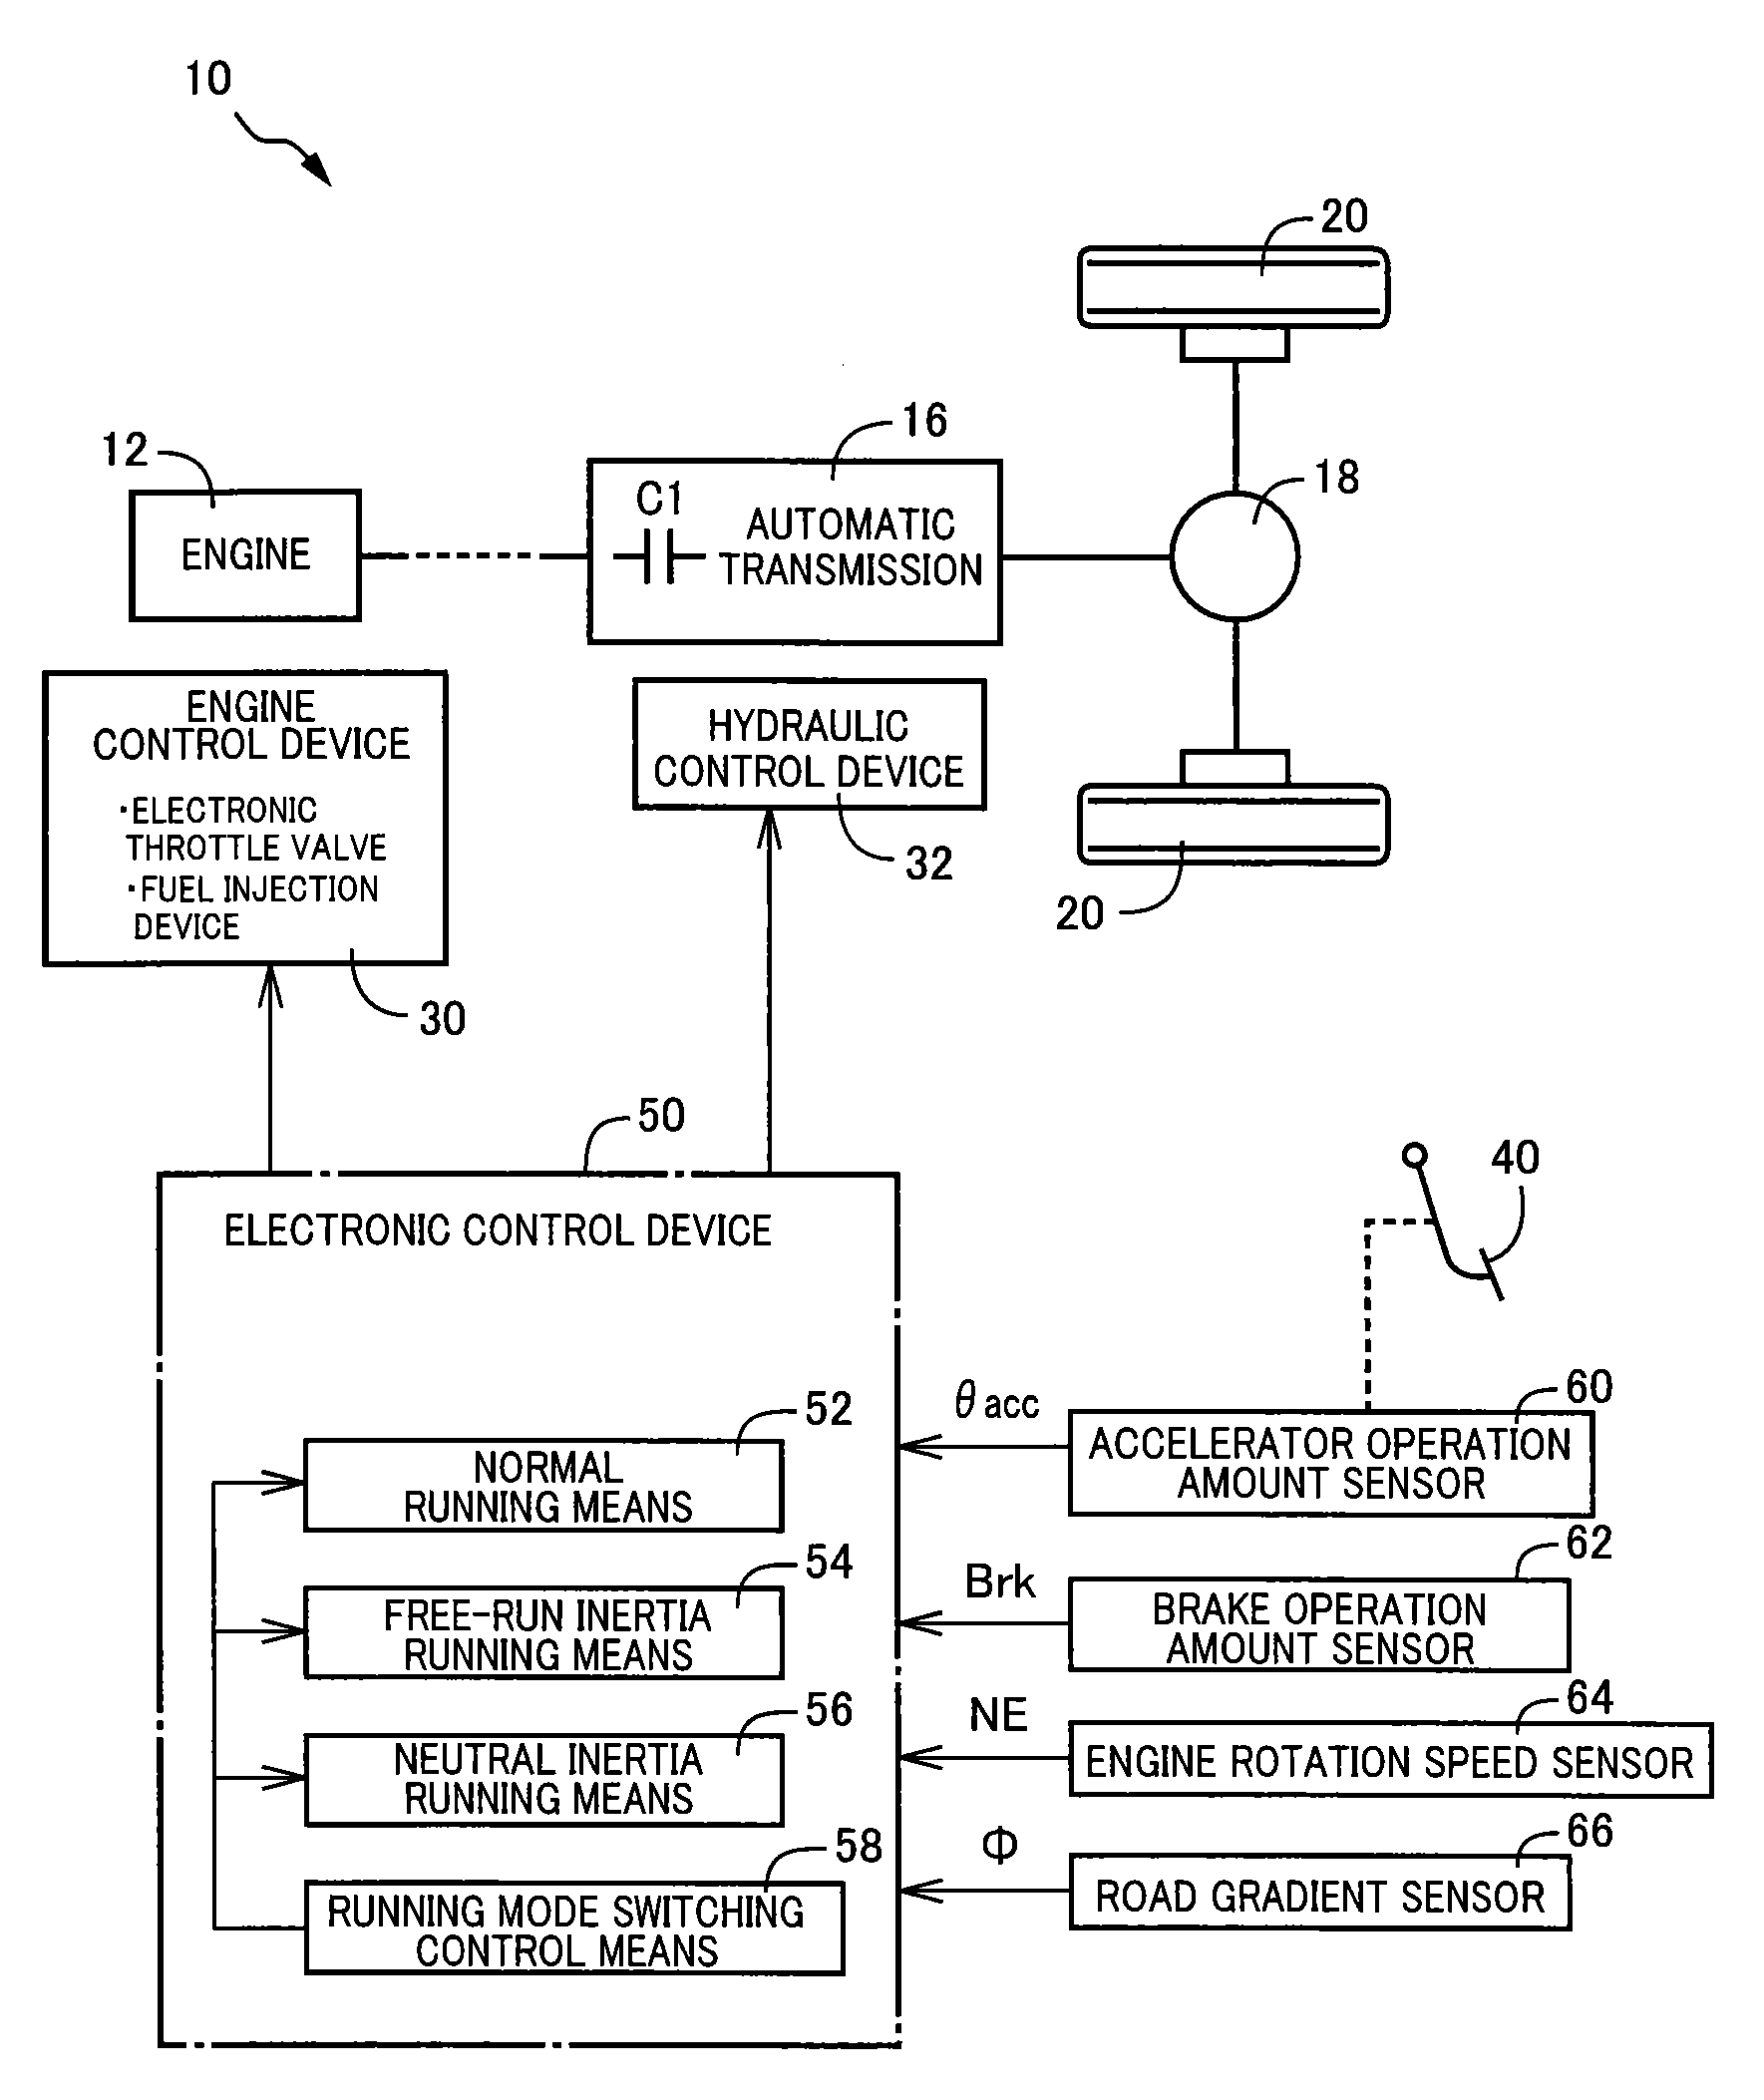 Vehicle drive controller